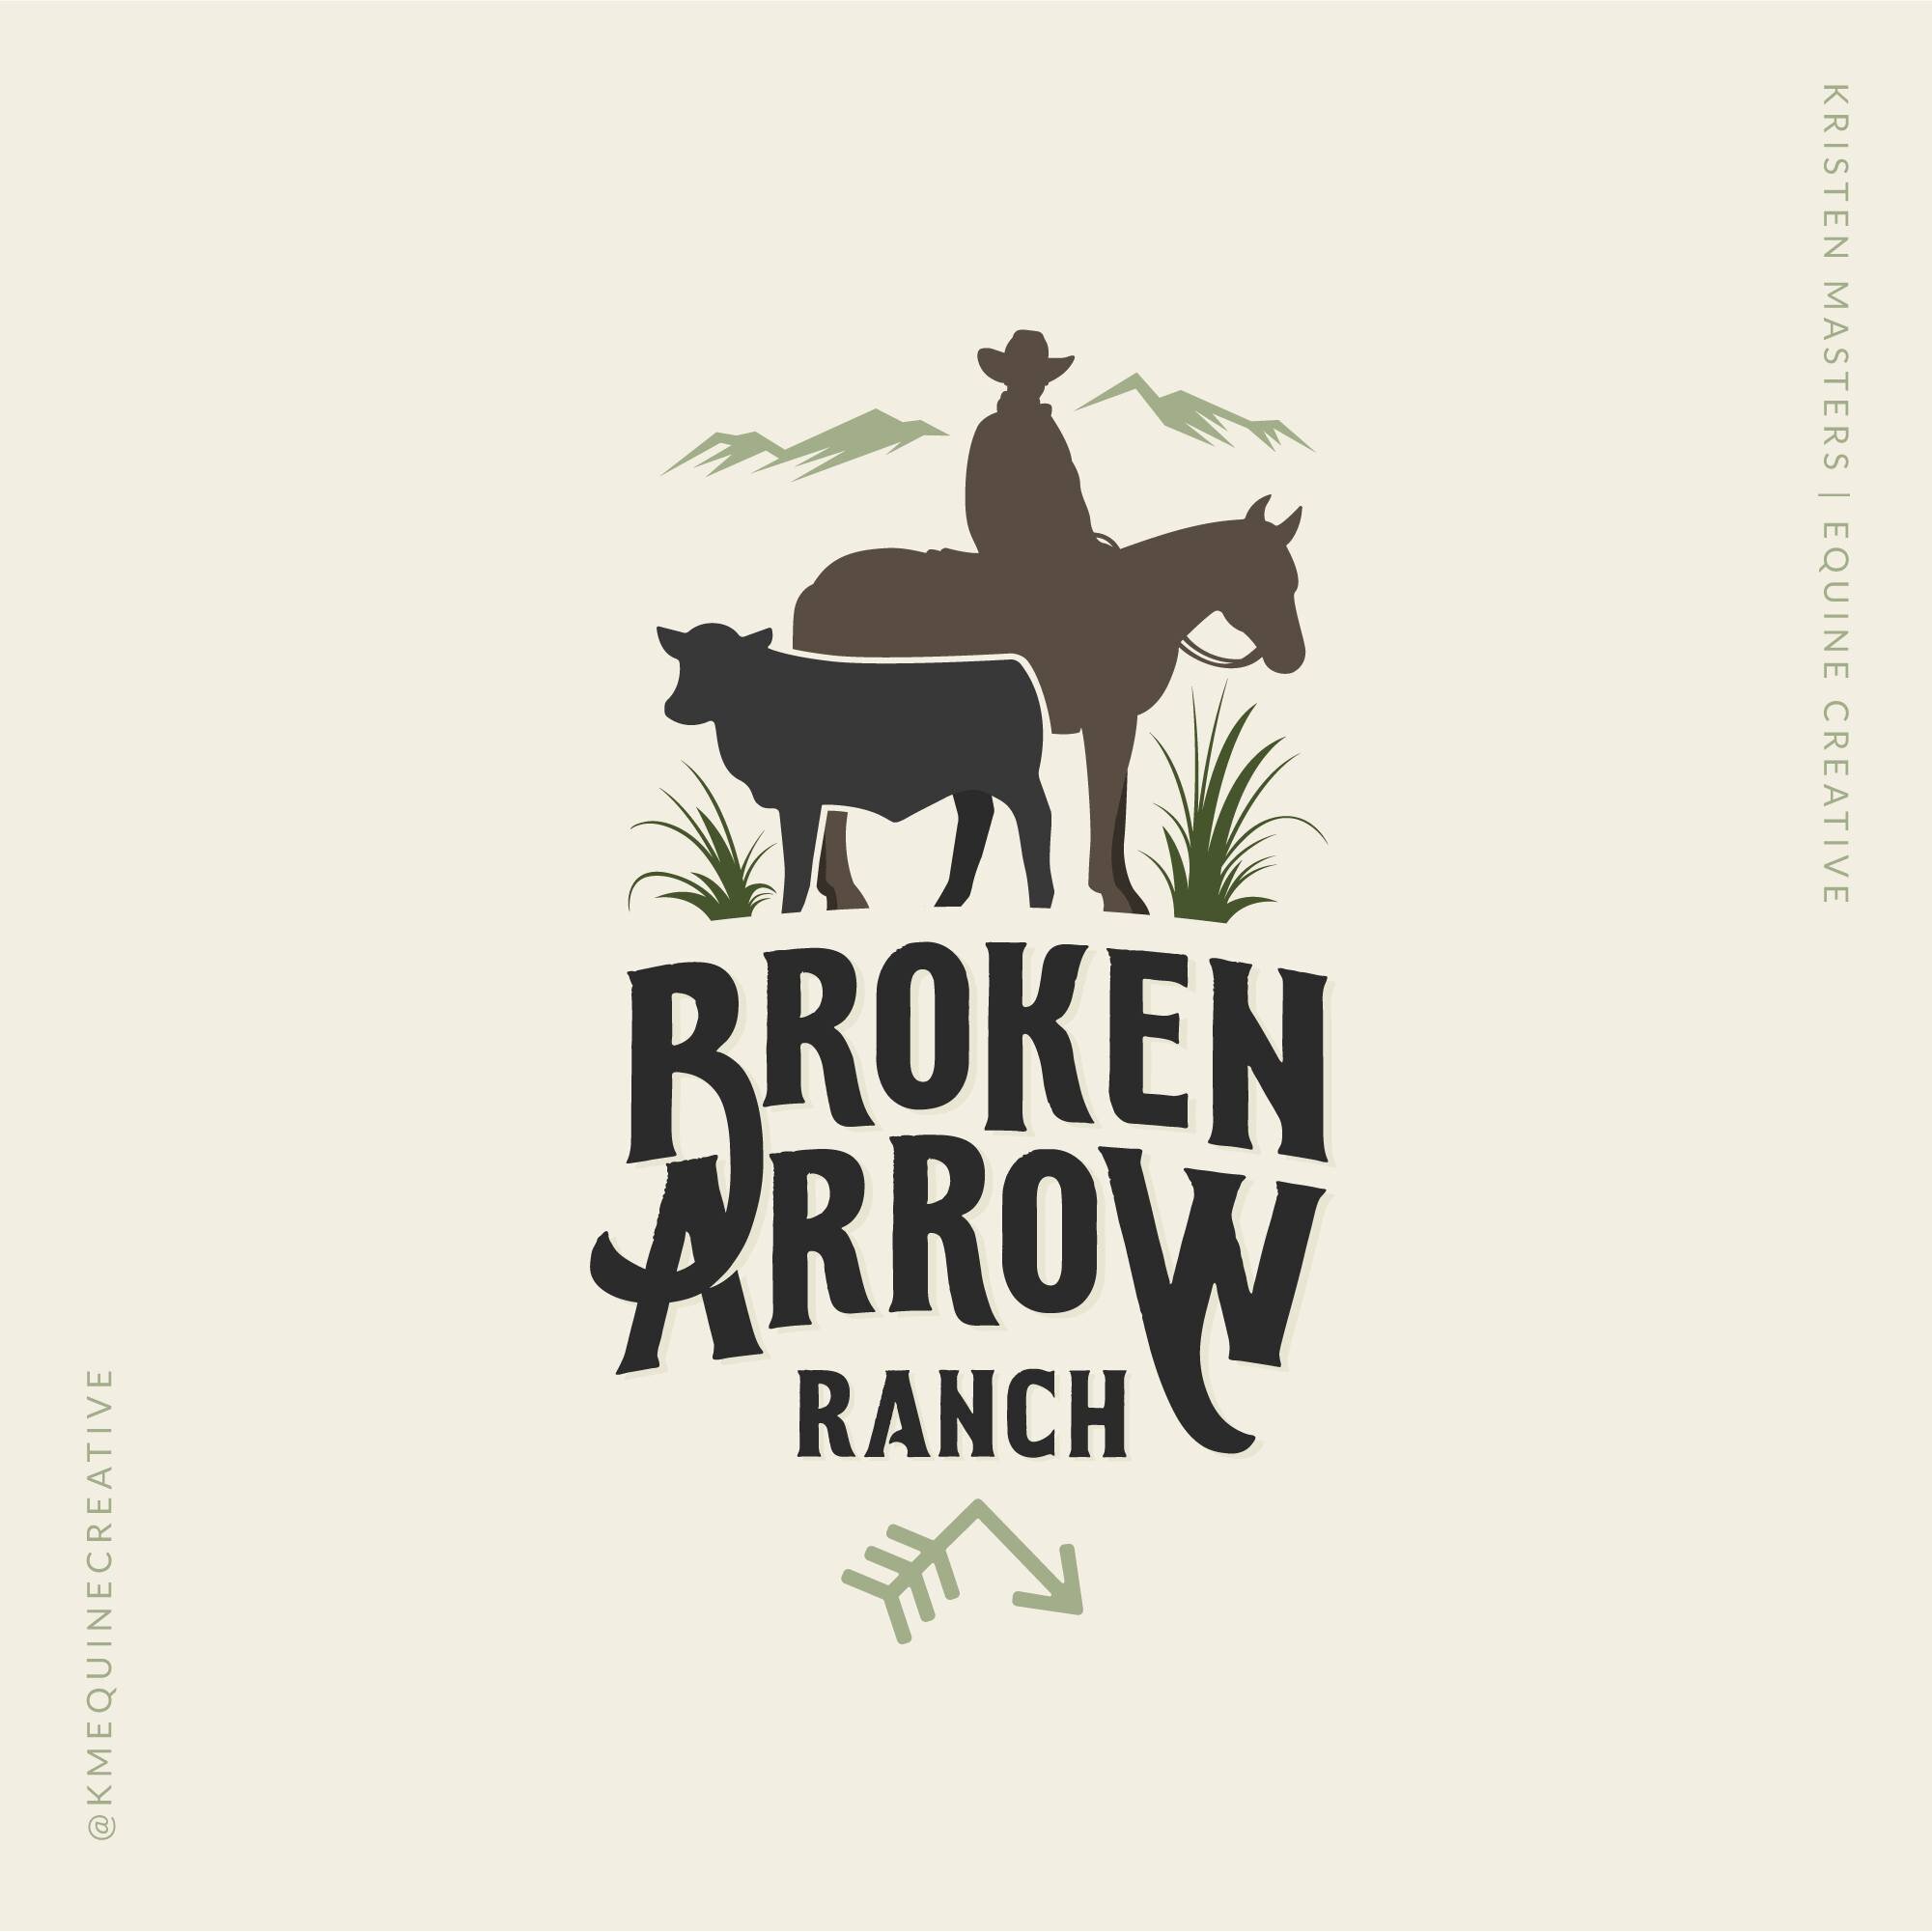 Another recent project, this time completed for Broken Arrow Ranch 🌾🐴🐮.

(Someone really needs to take the lead on making an Angus emoji happen.)

A diverse cattle, horse, and land enterprise, Broken Arrow Ranch was looking for a logo mark and cor